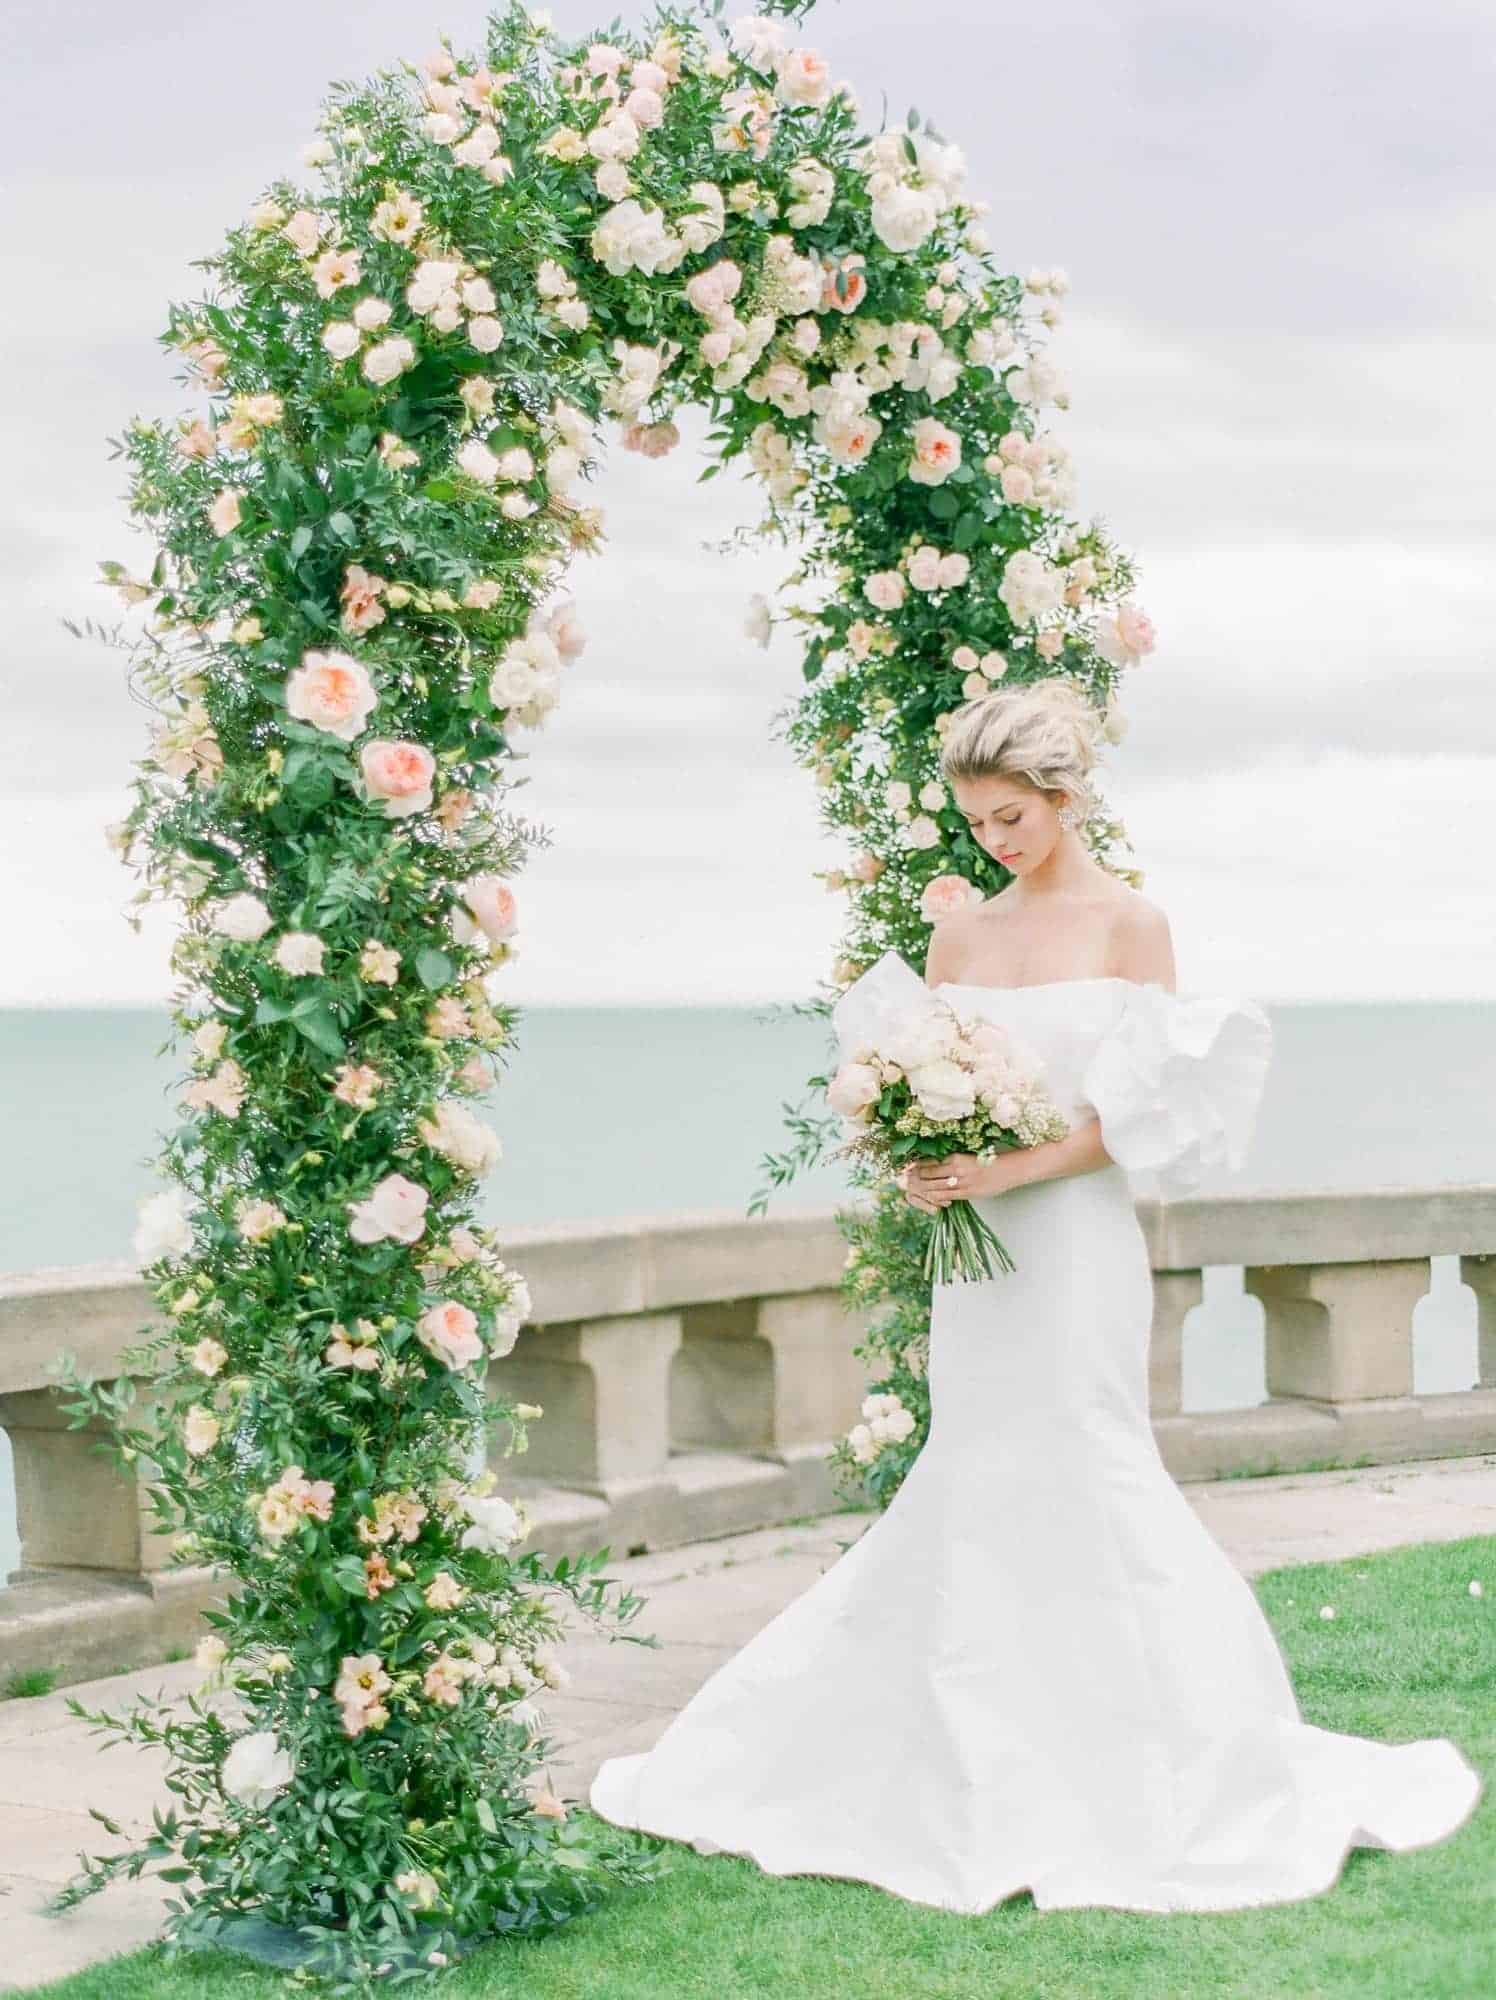 8 Outdoor Wedding Ceremony Styles - David Austin Wedding and Event Roses